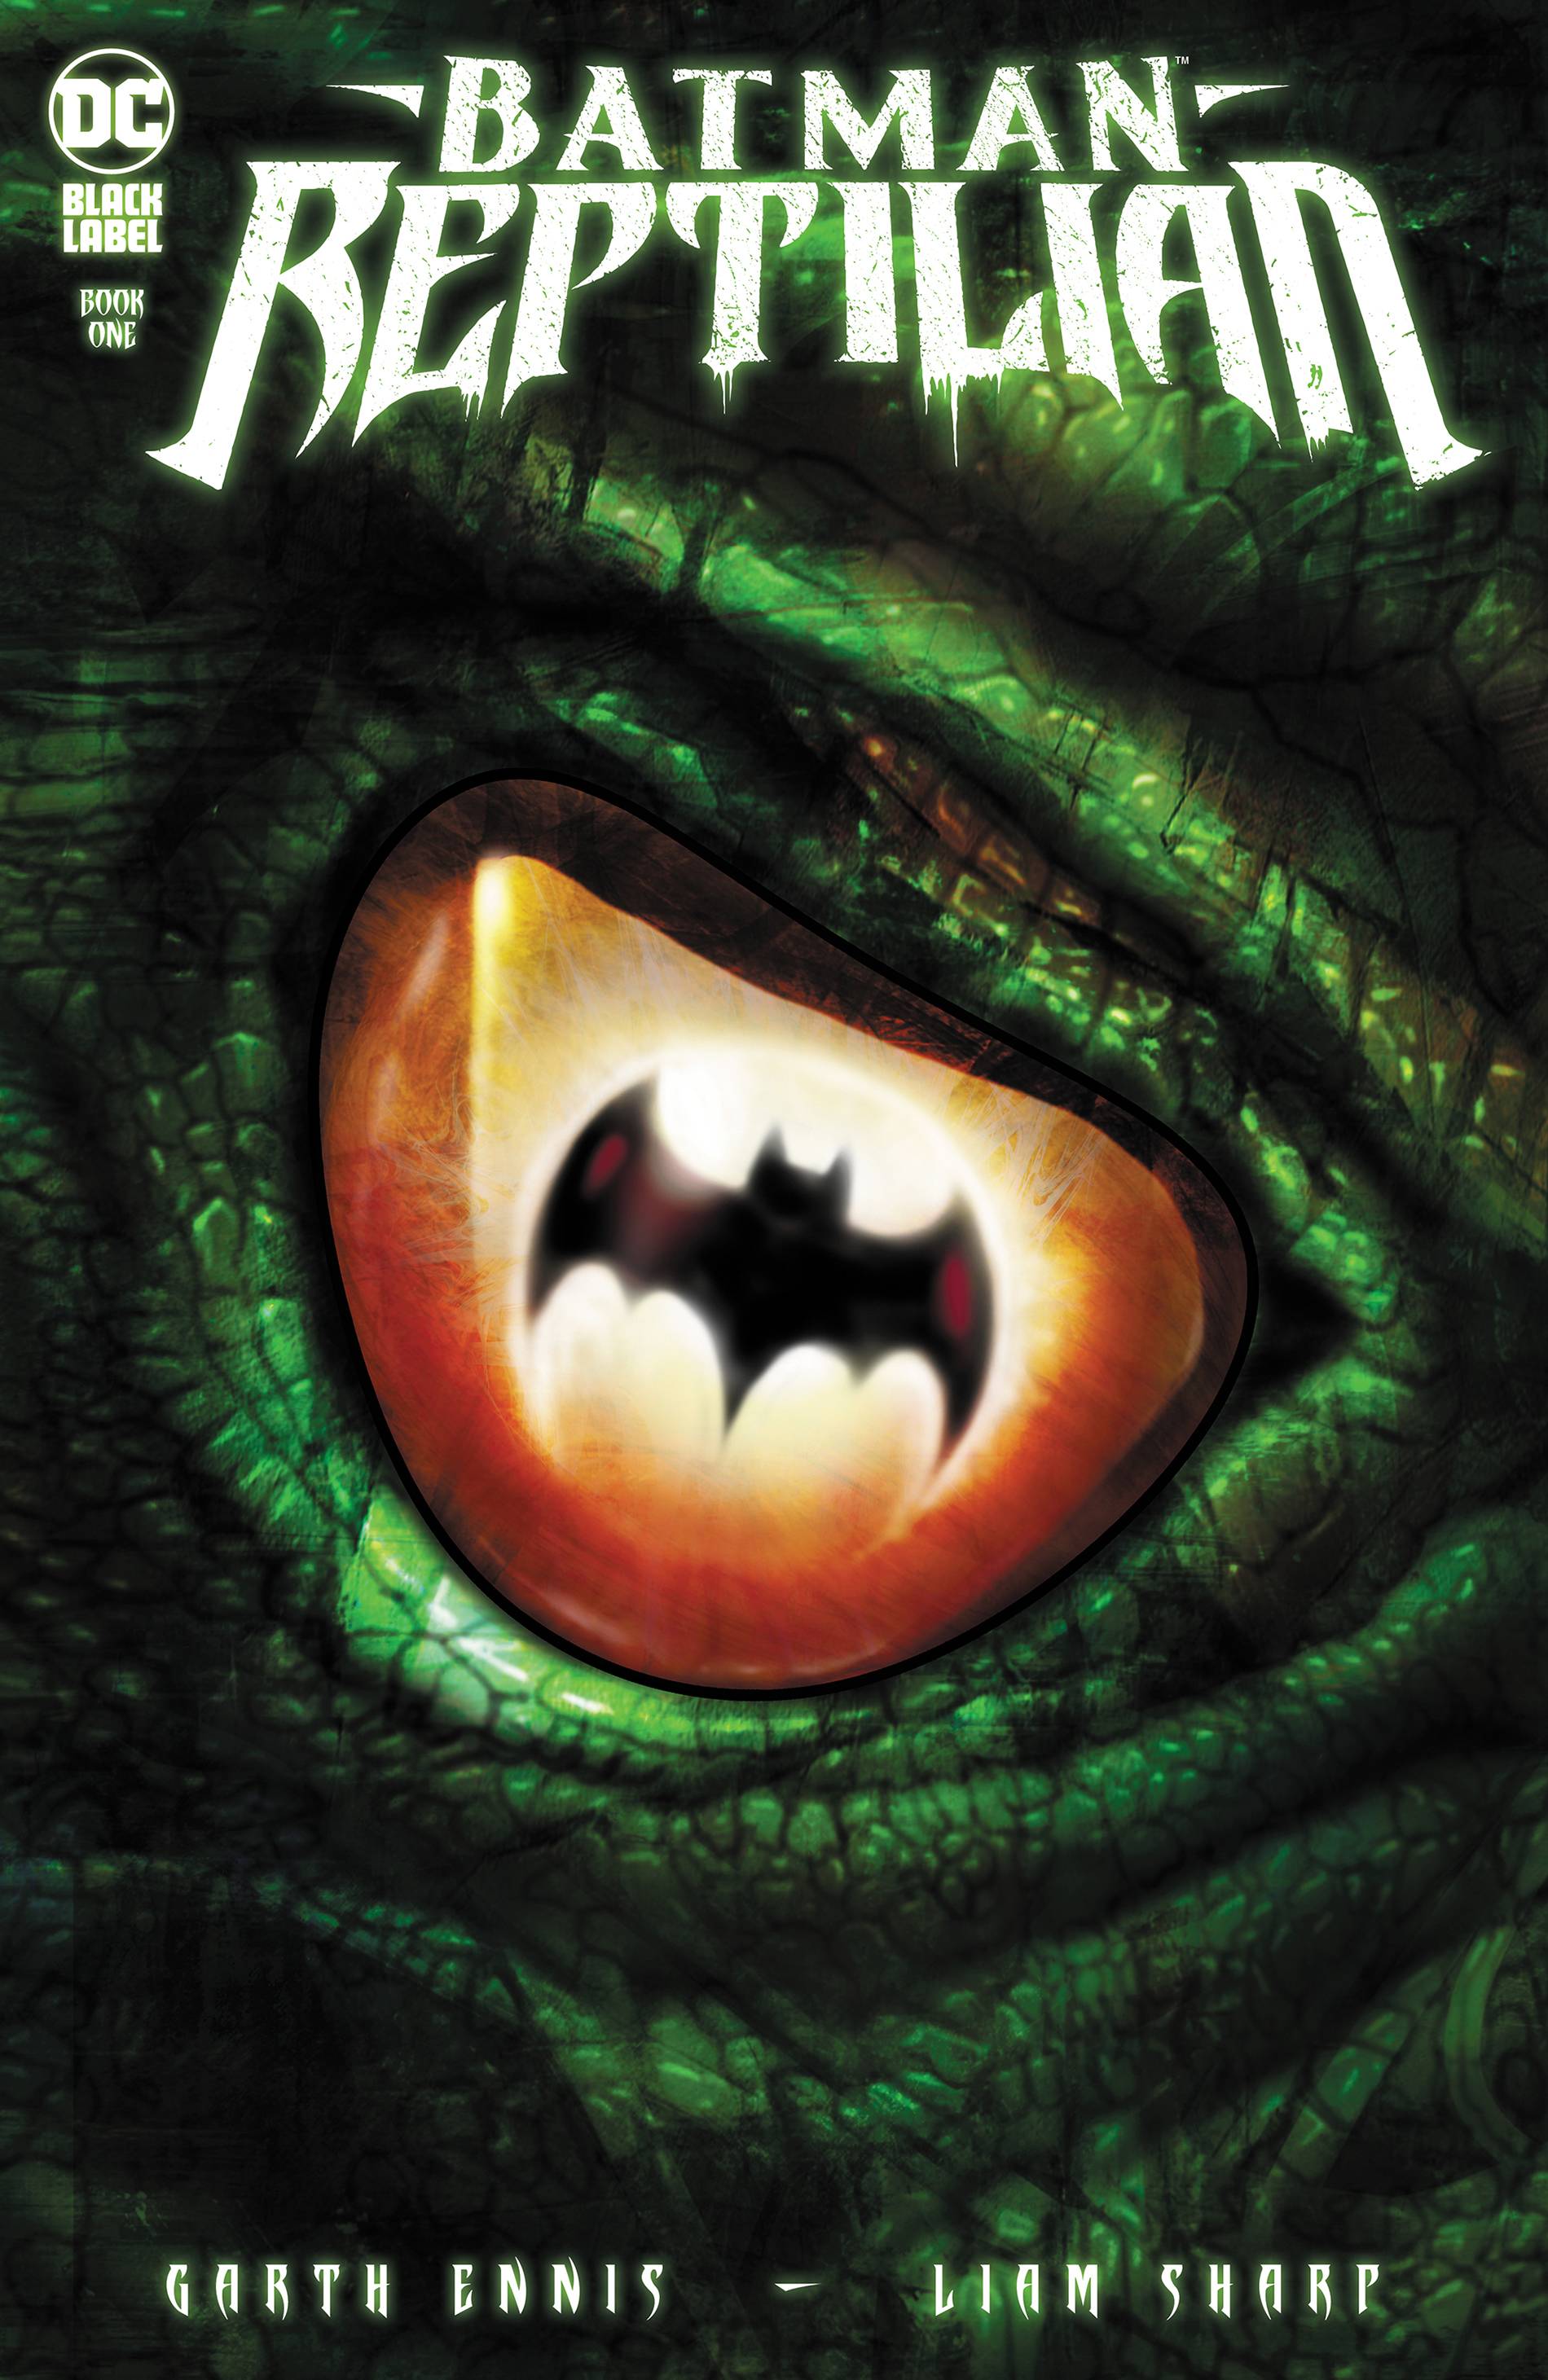 Batman Reptilian #1 - Signed By Ennis And Sharp